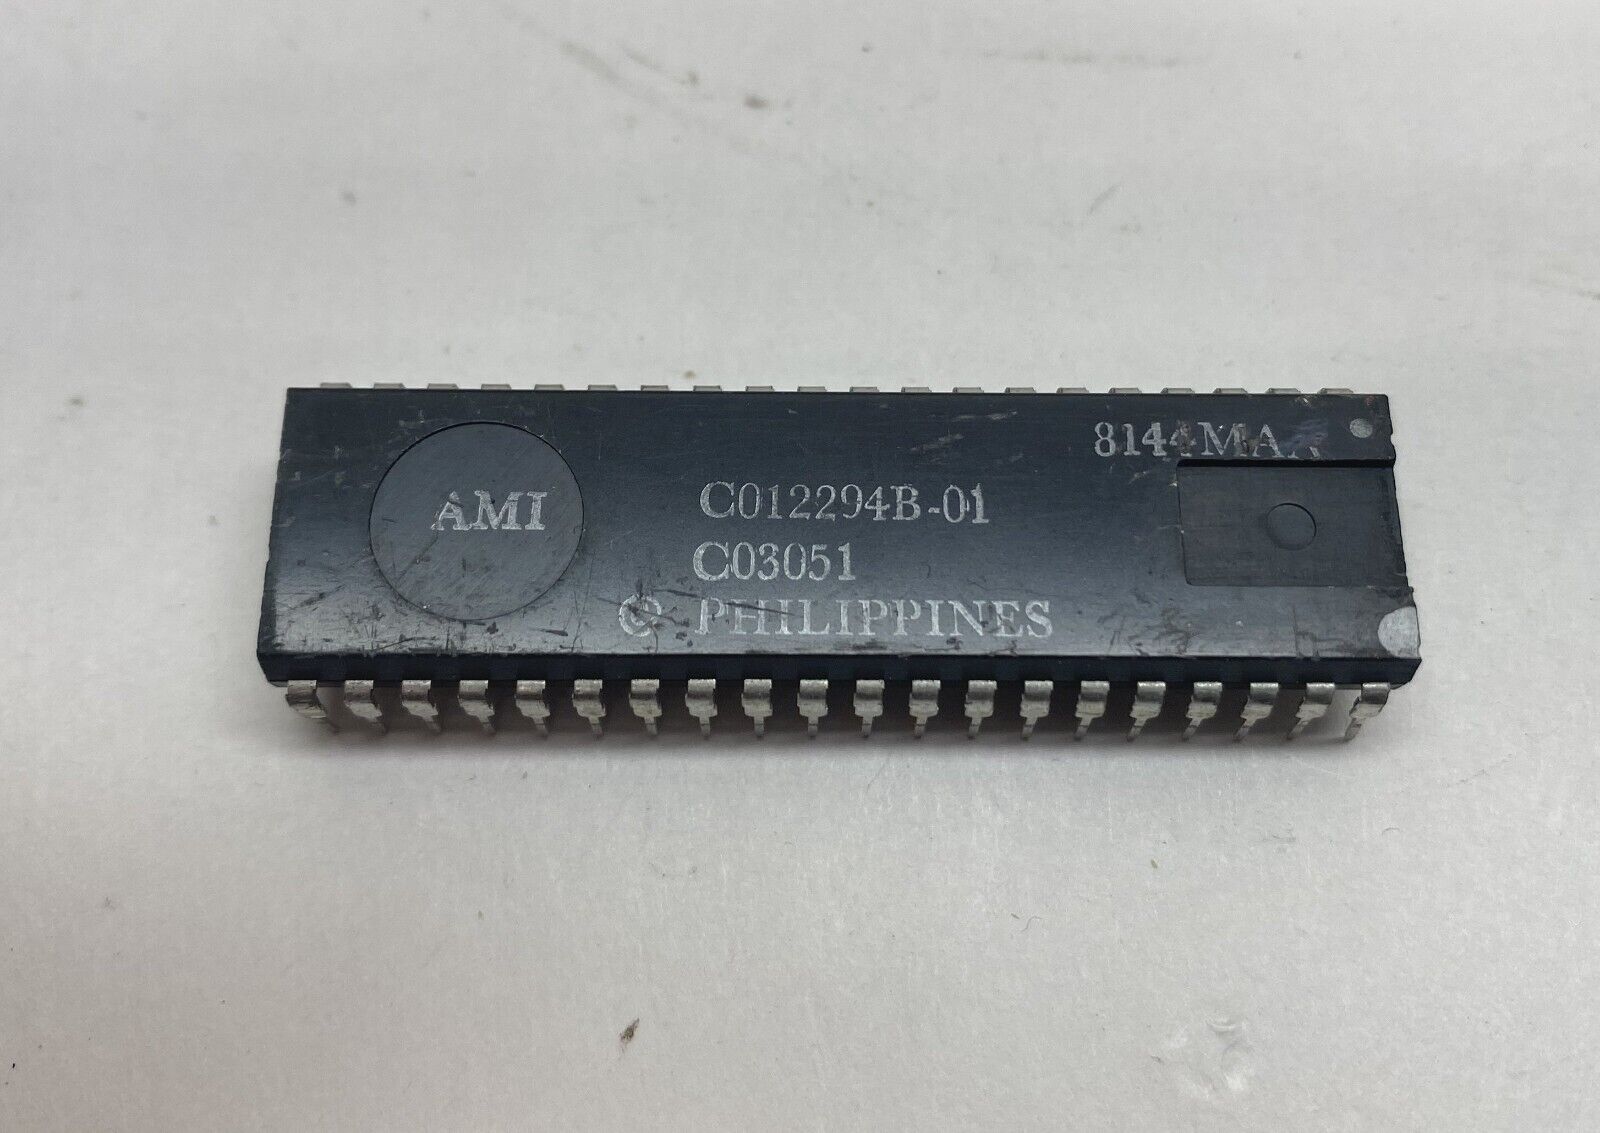 Atari Pokey C012294B IC Chip, Tested and Working pulled from Arcade PCB